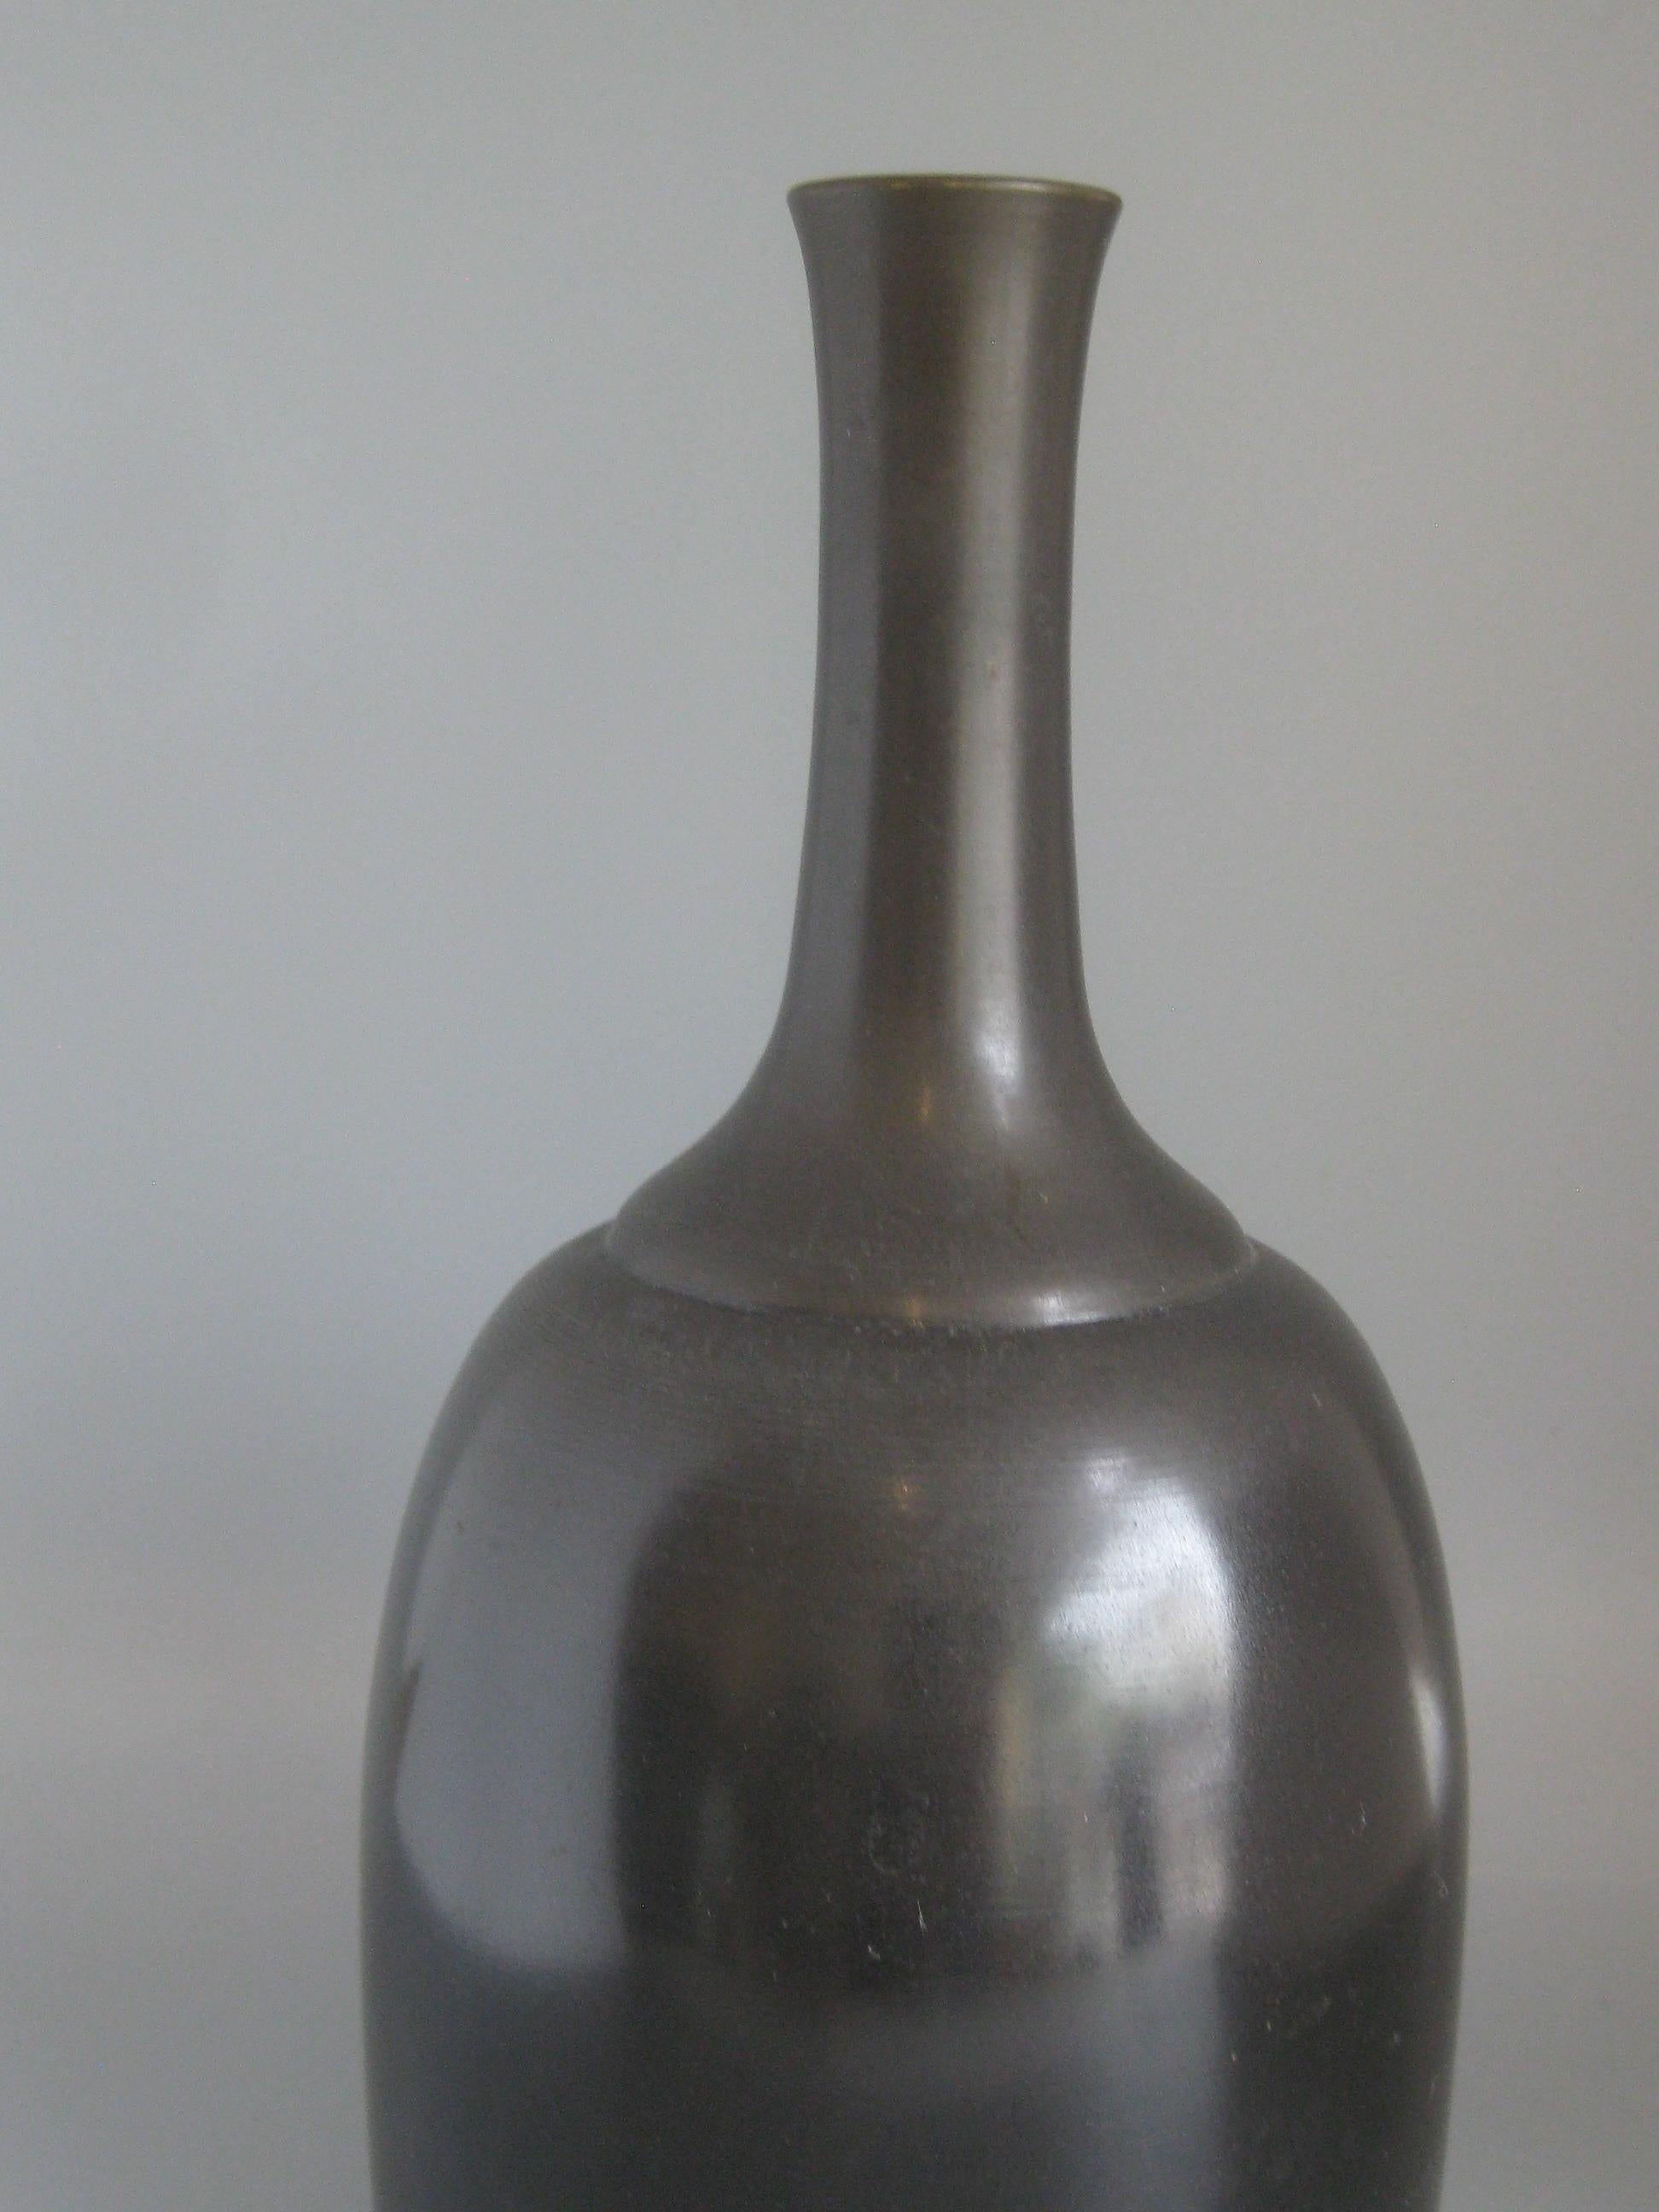 Outstanding Japanese modernist Ikebana bronze vase/vessel, circa 1960s. Sold by Neiman Marcus of Japan. Wonderful form and design. Has the original paper label on the bottom. In very nice condition for its age. No chips, no dents, no cracks and no